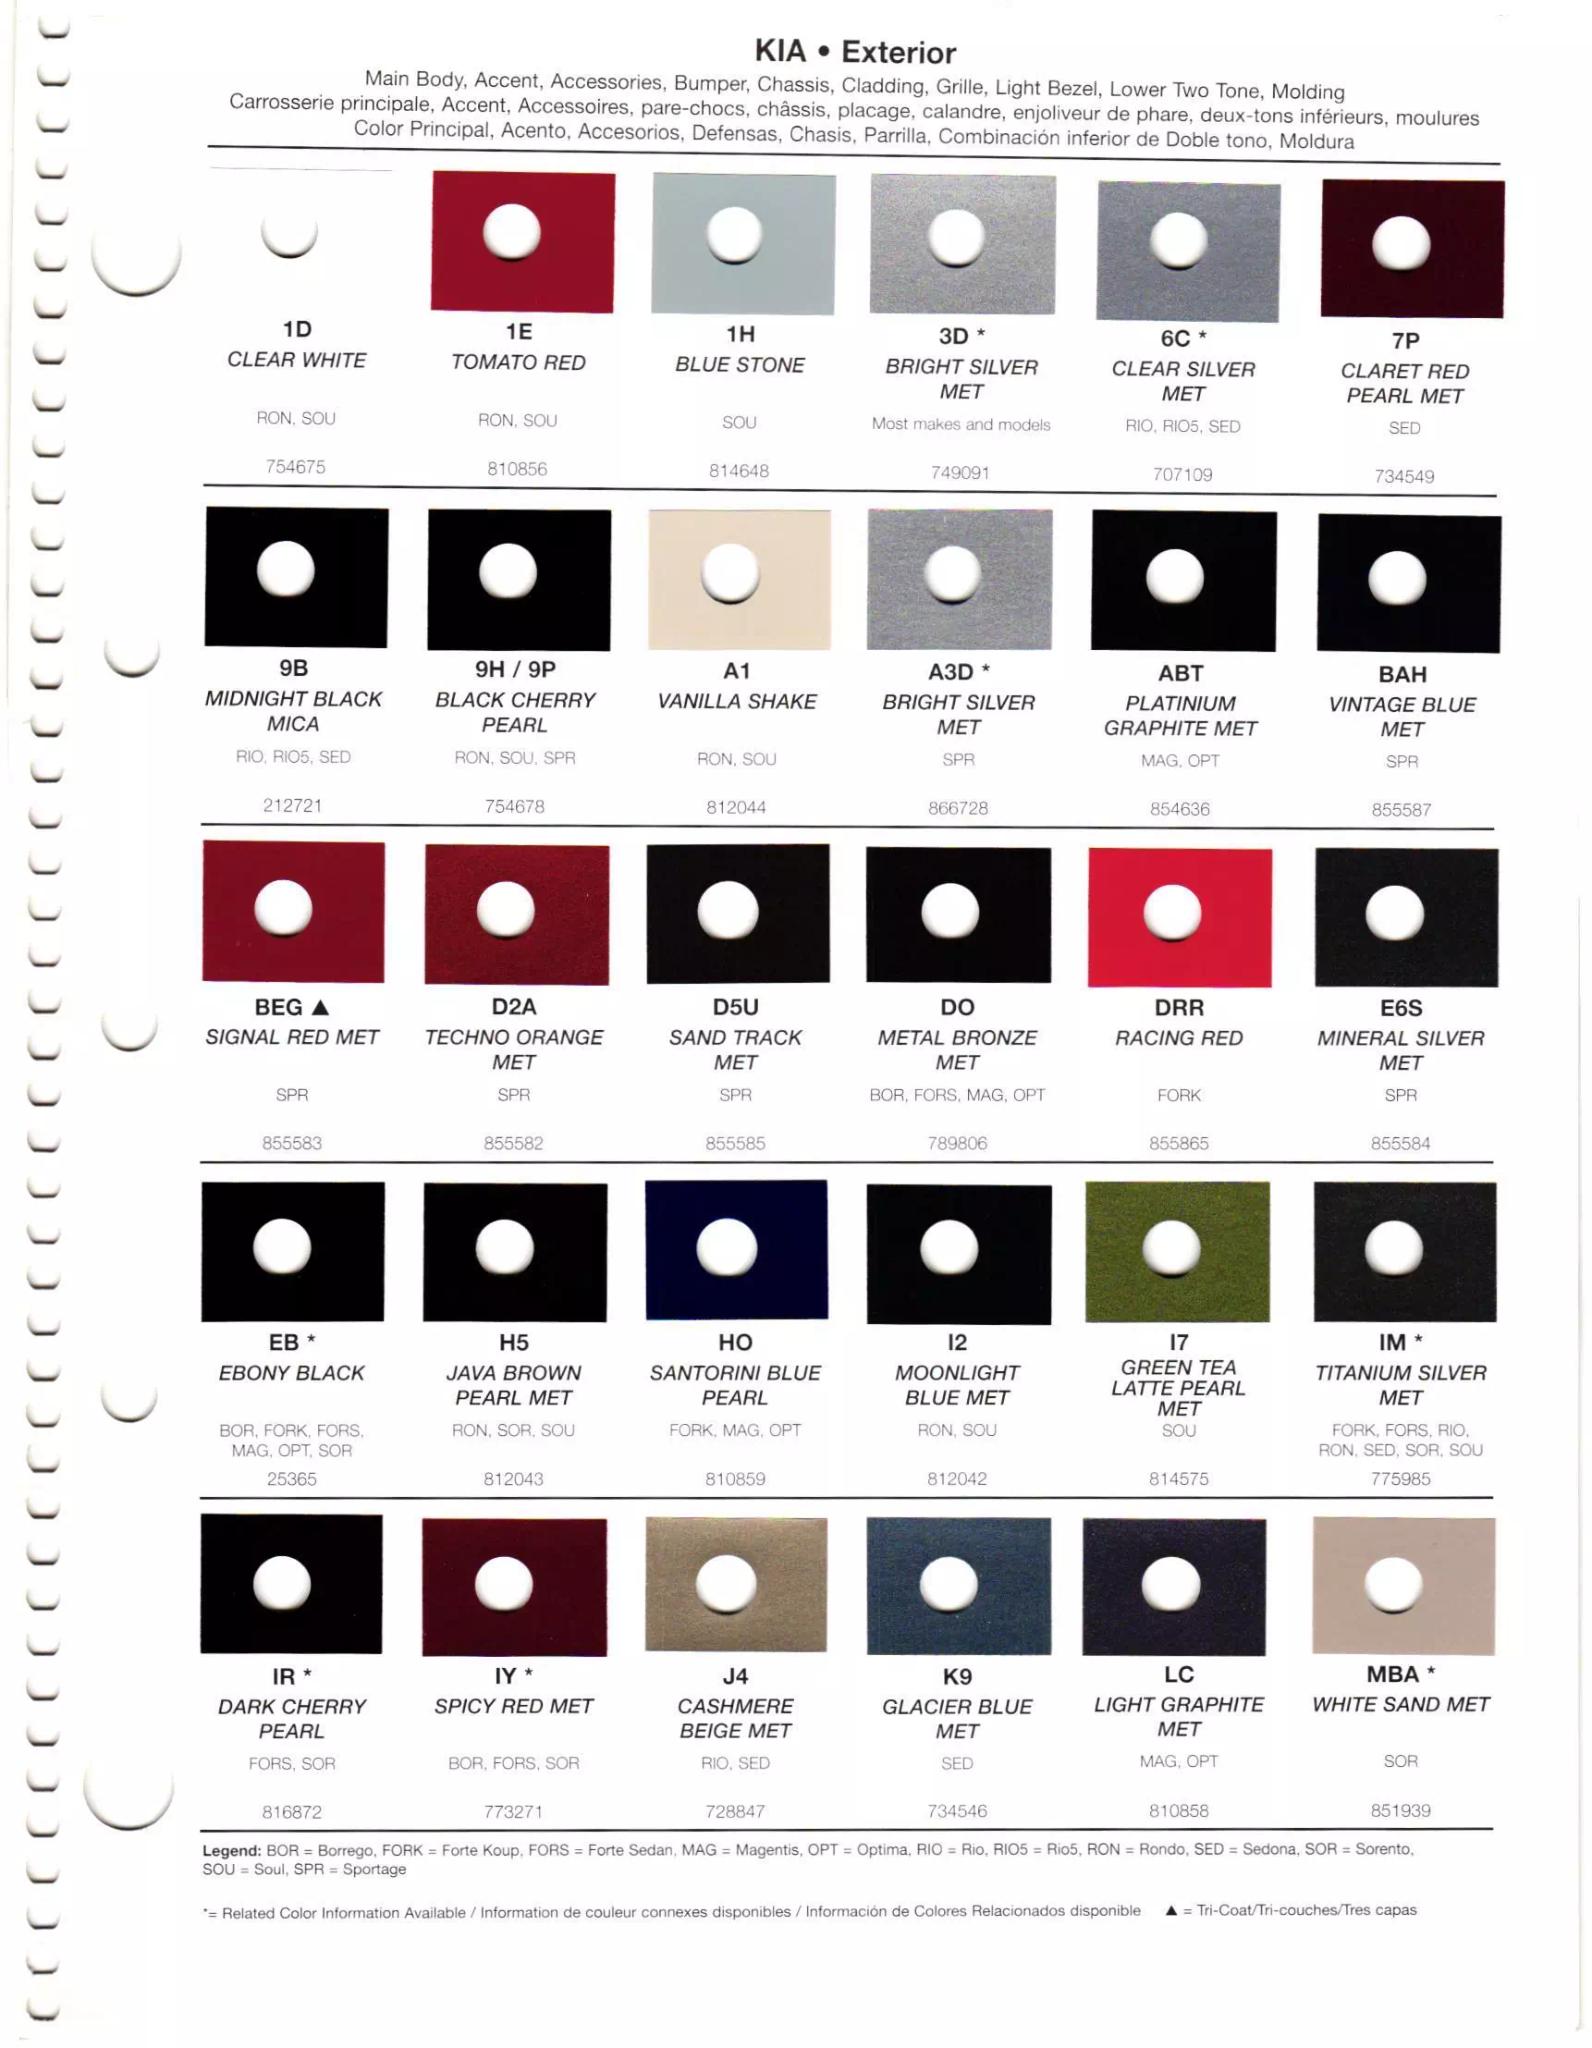 Paint codes, and their ordering stock numbers for their color on 2011 vehicles